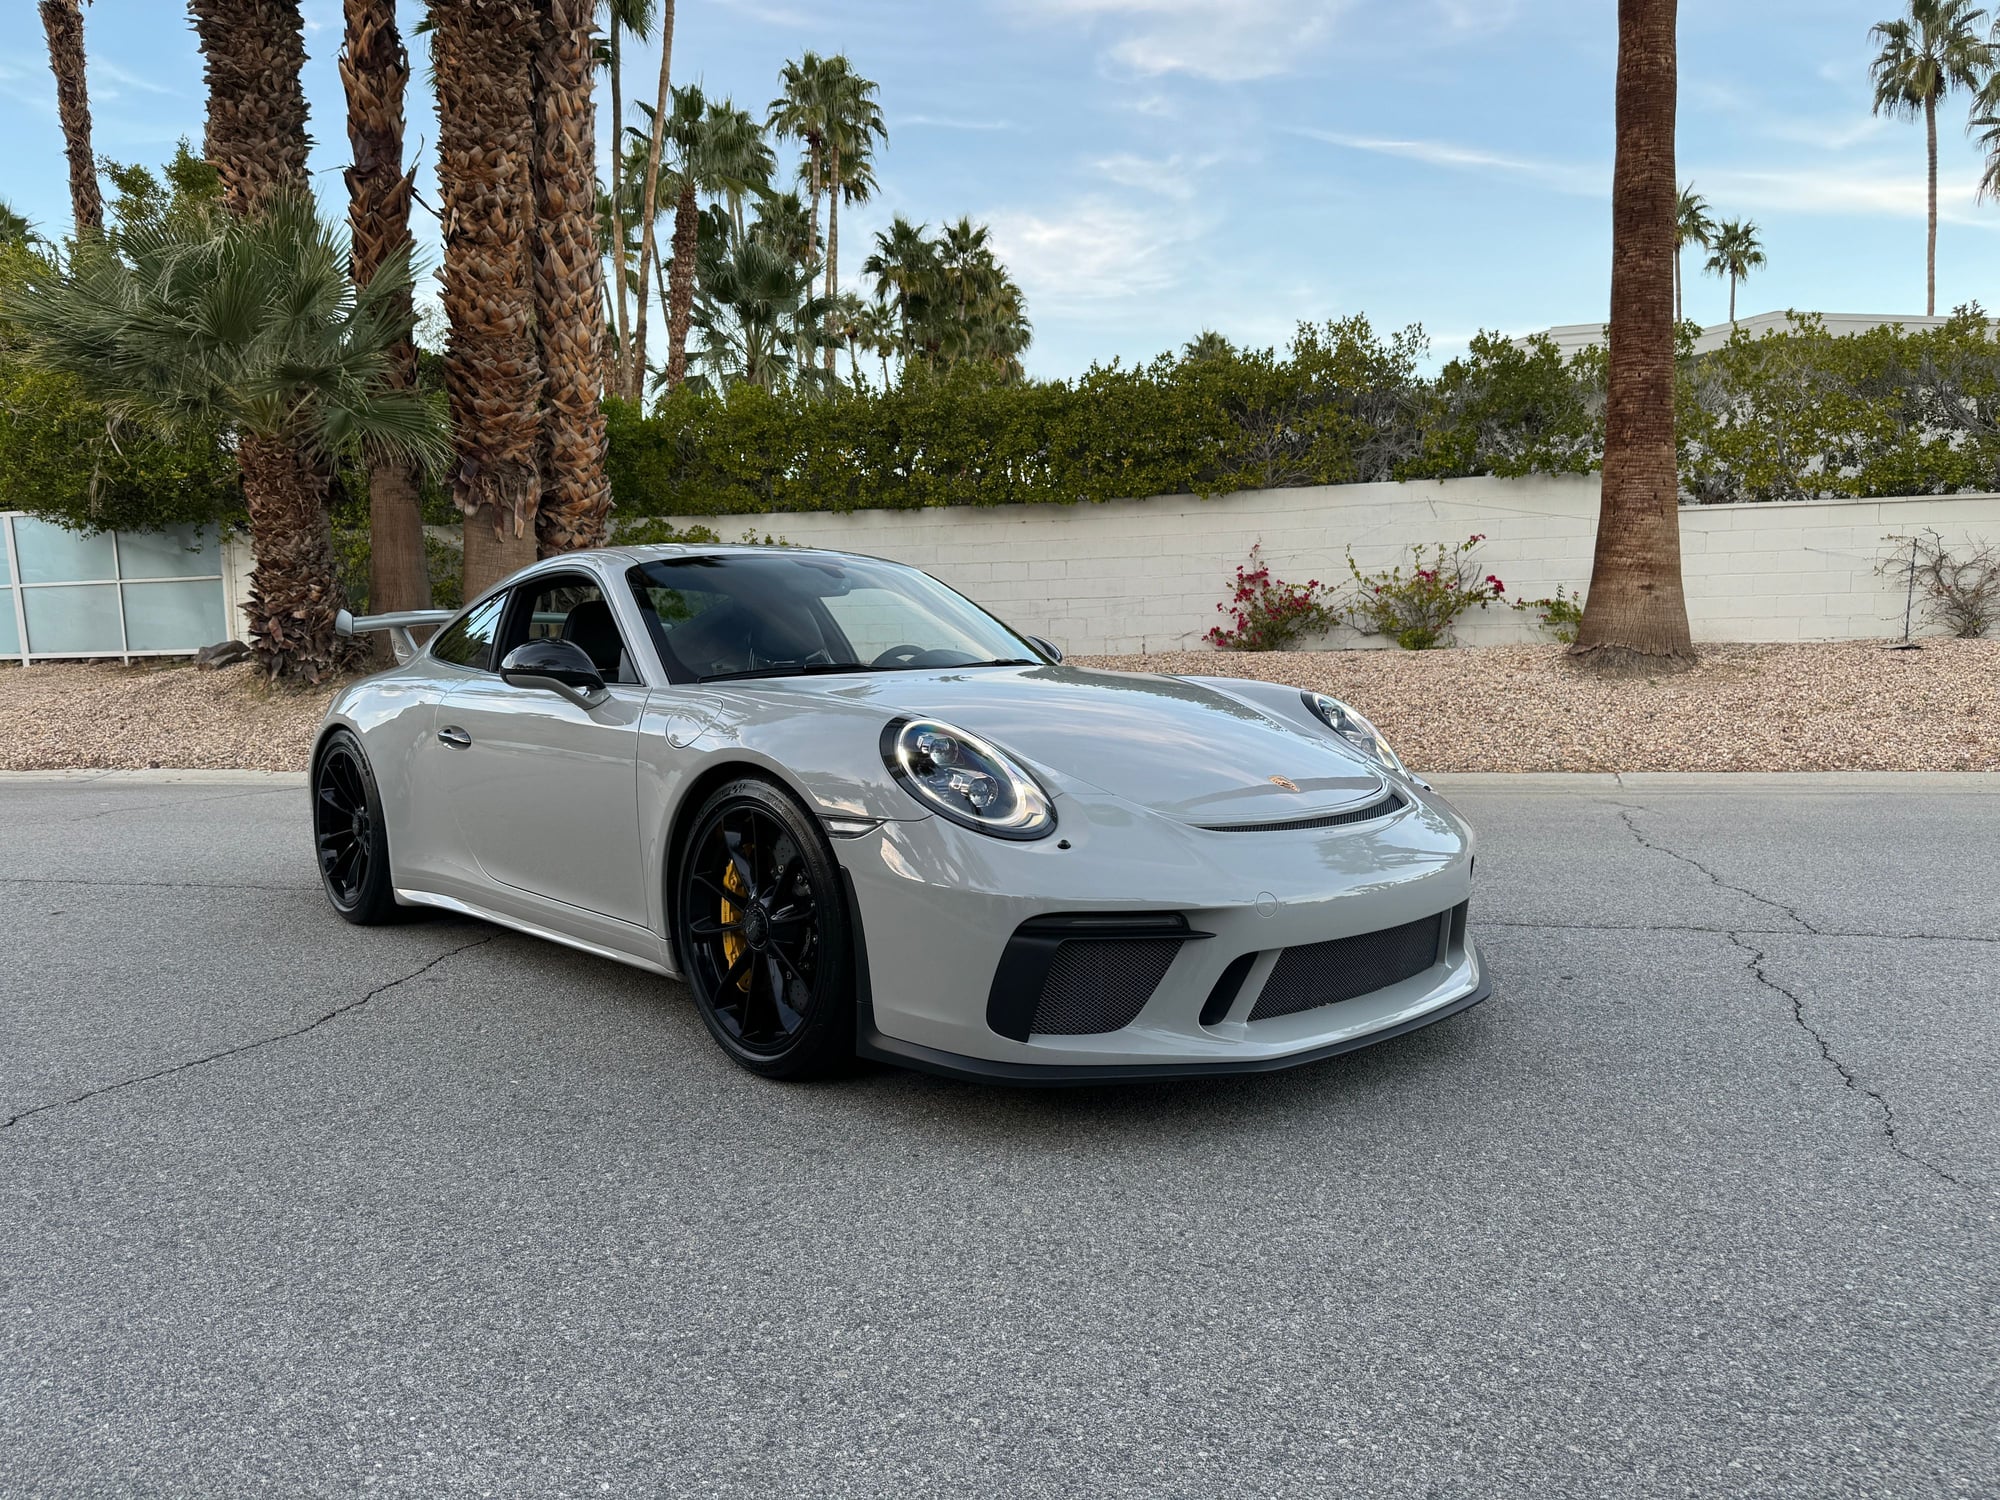 2018 Porsche GT3 - 2018 991.2 GT3 - Chalk on Black, 6 Speed, LWBS, PCCBs, FAL - dream spec! - Used - VIN WP0AC2A90JS175679 - 20,400 Miles - 6 cyl - Manual - Coupe - Gray - Palm Springs, CA 92234, United States